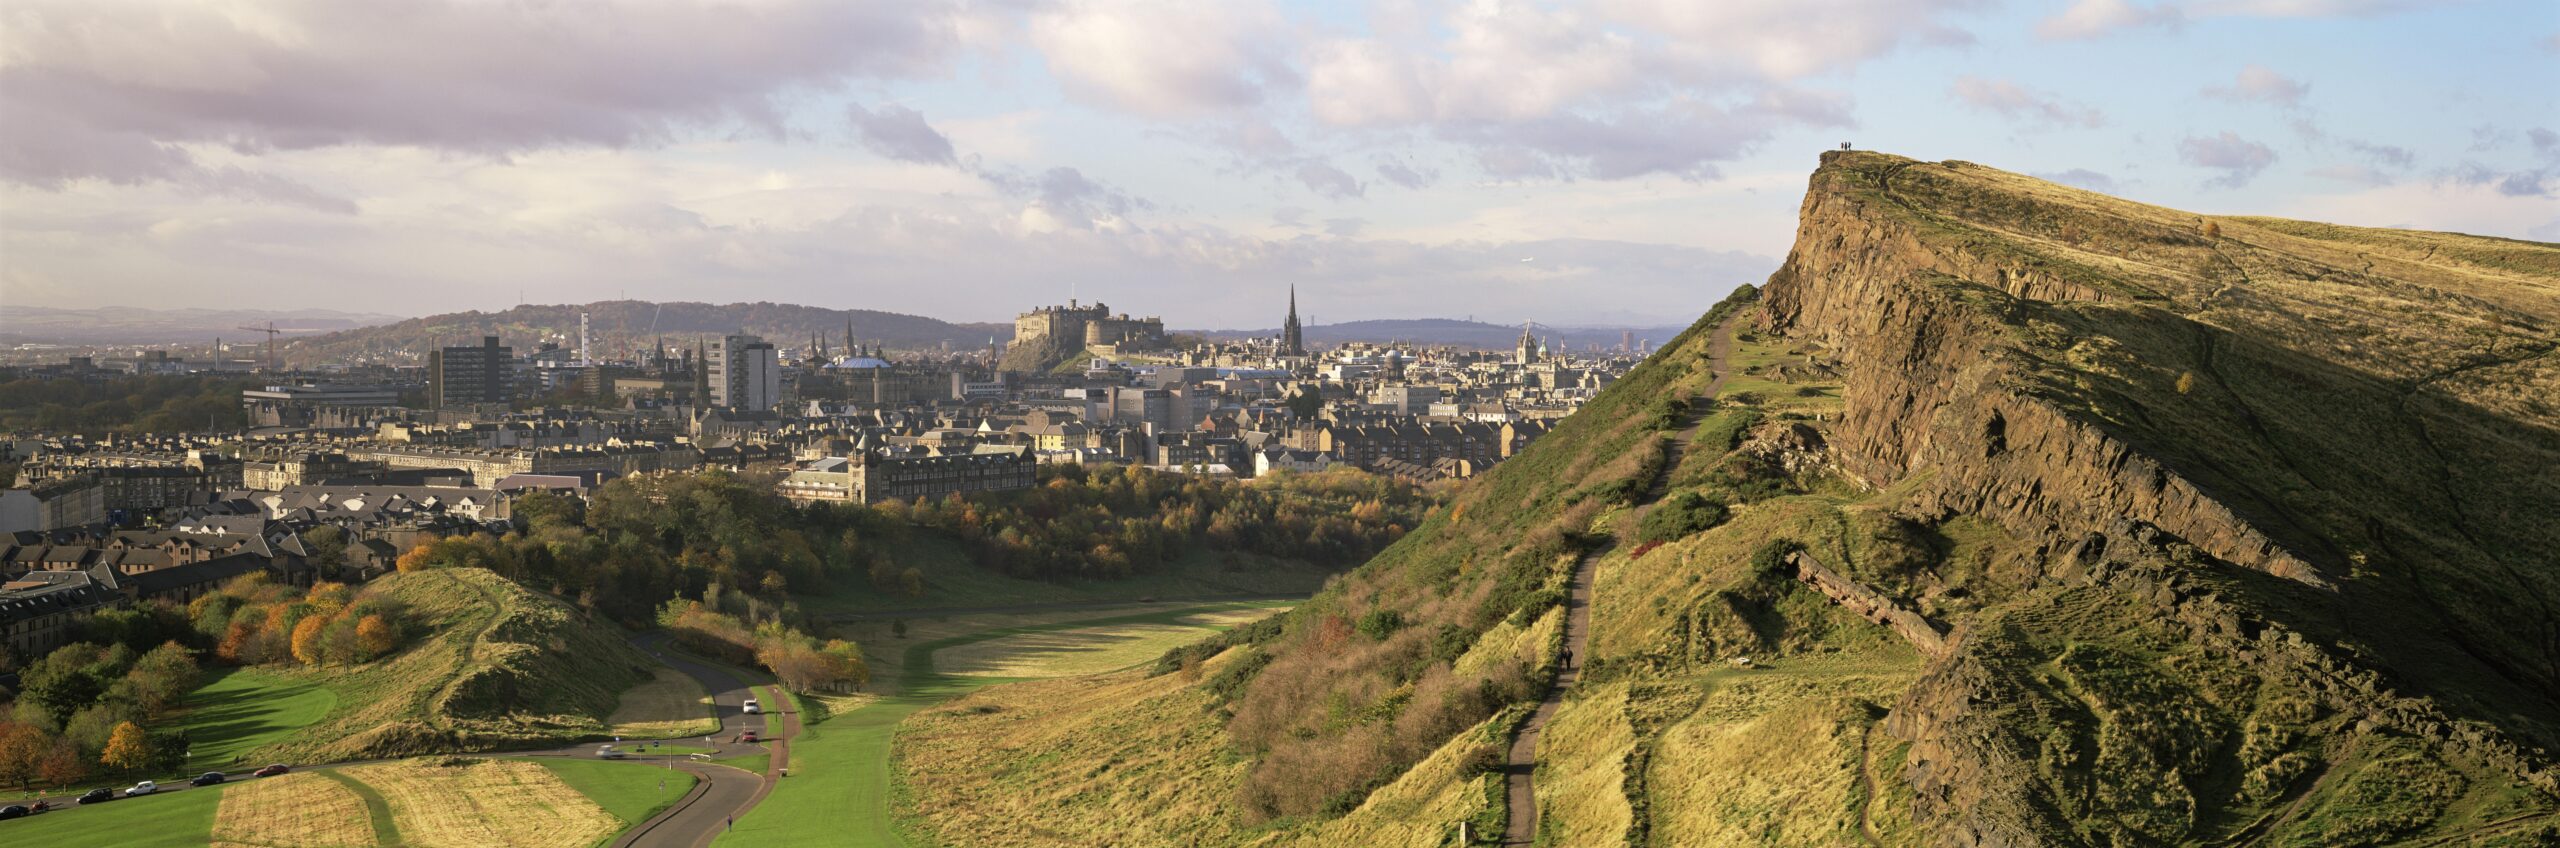 Arthur's Seat - View over Salisbury Crags towards the city centre of Edinburgh (Photo Credit: Paul Tomkins / VisitScotland / Scottish Viewpoint)